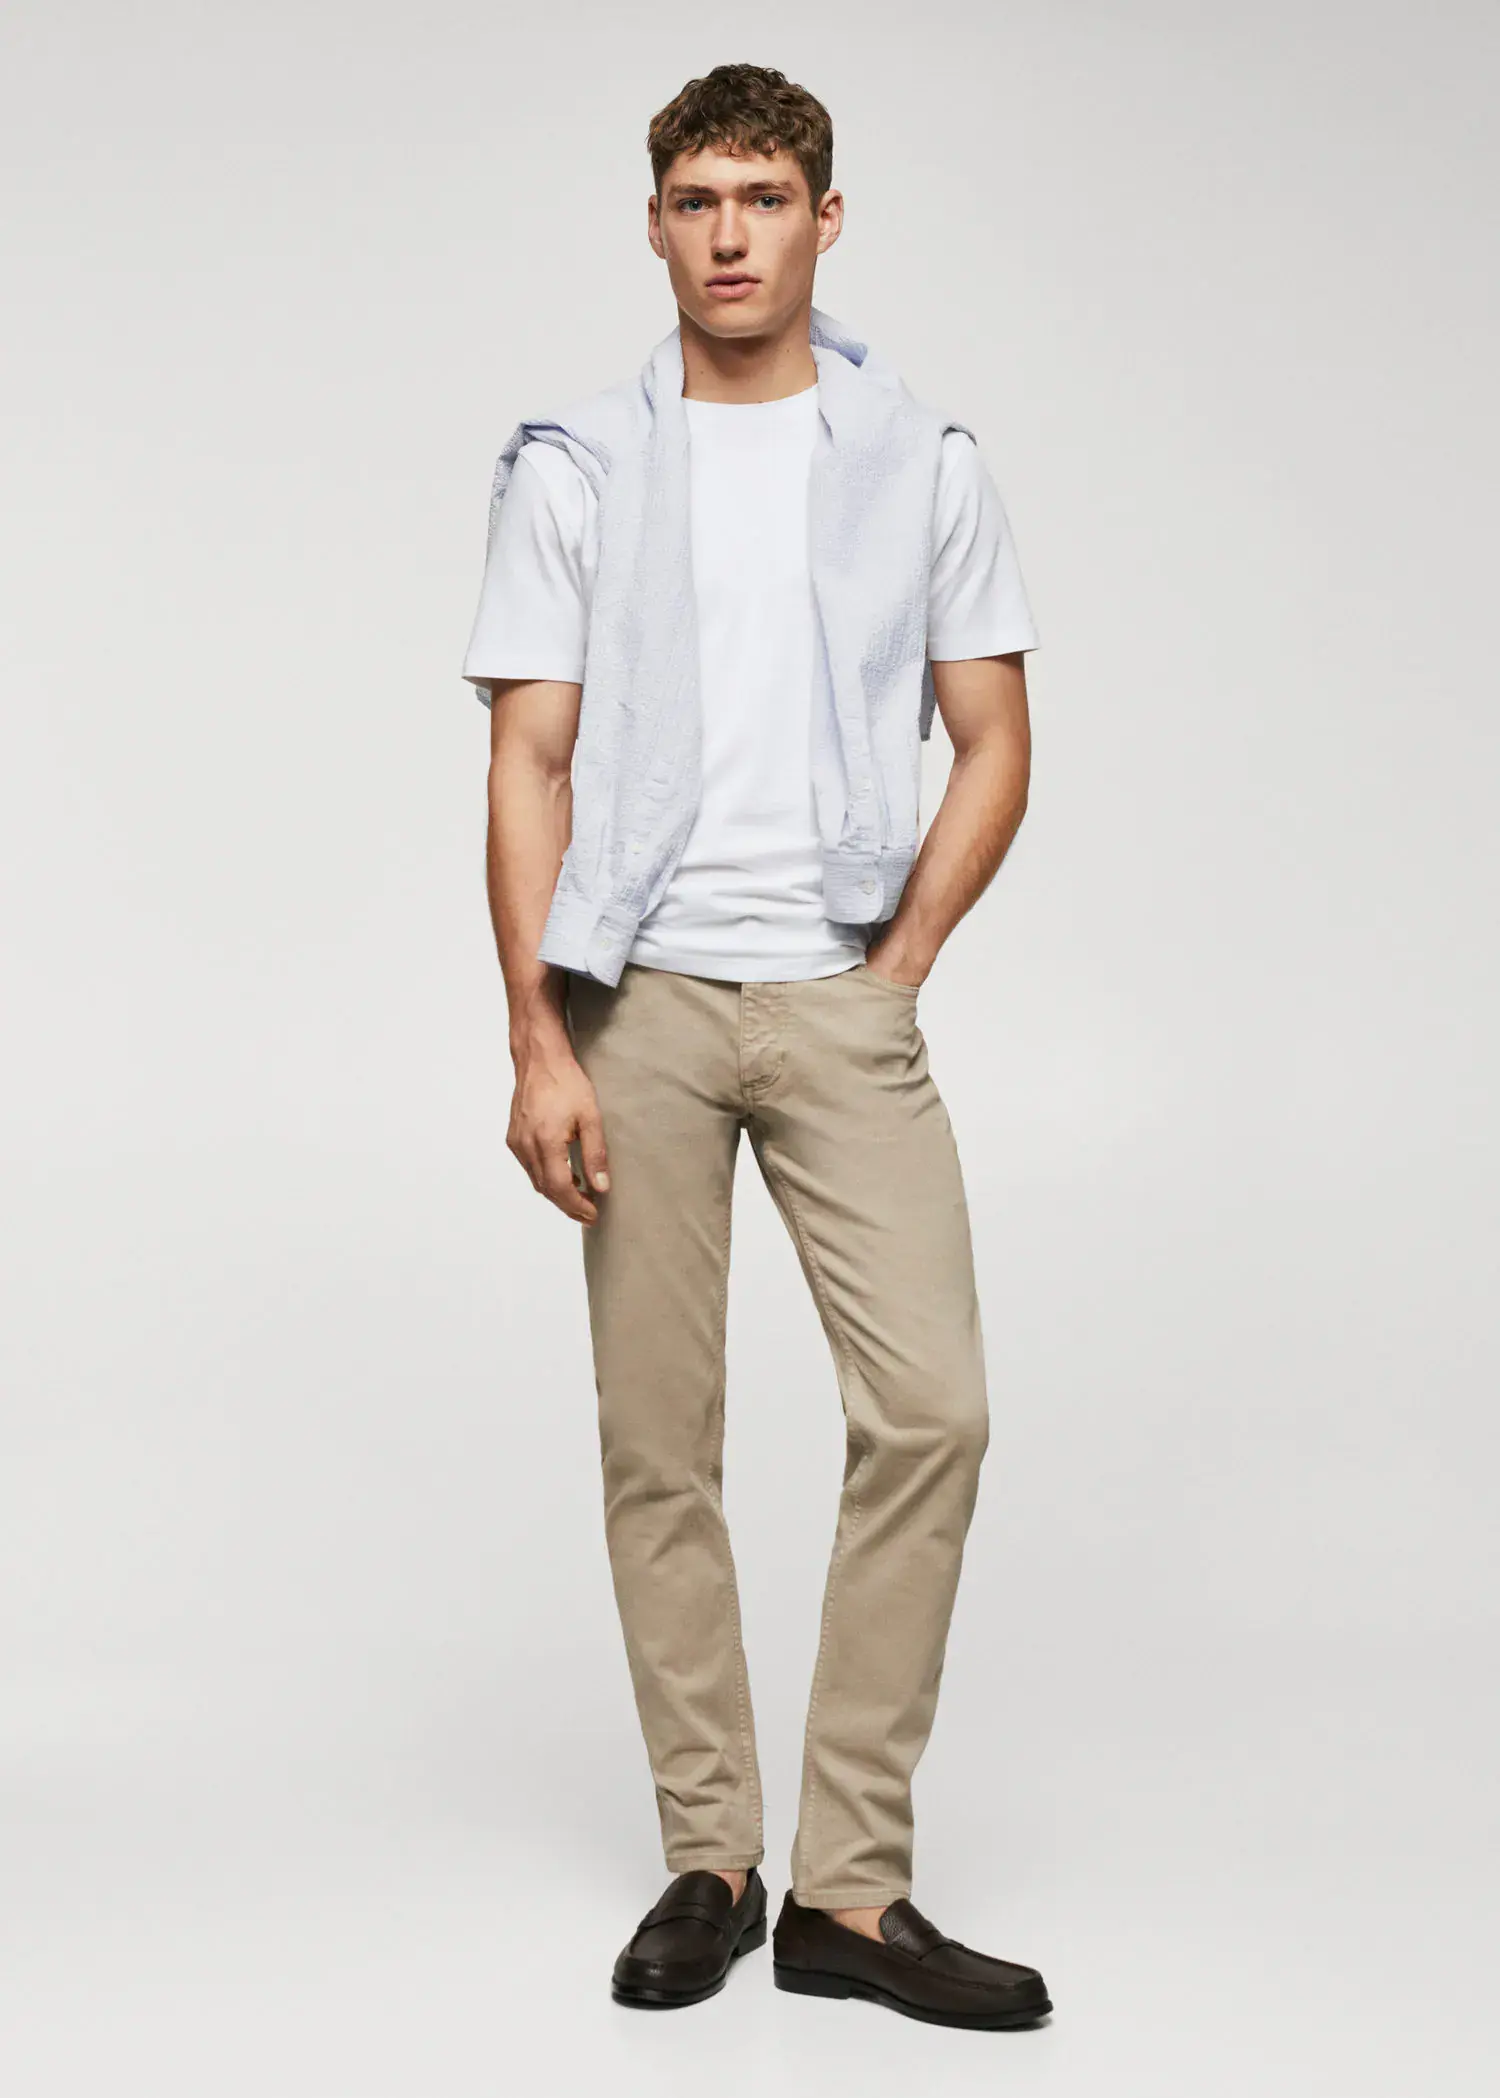 Mango Basic lightweight cotton t-shirt. a young man wearing a white shirt and a white vest. 